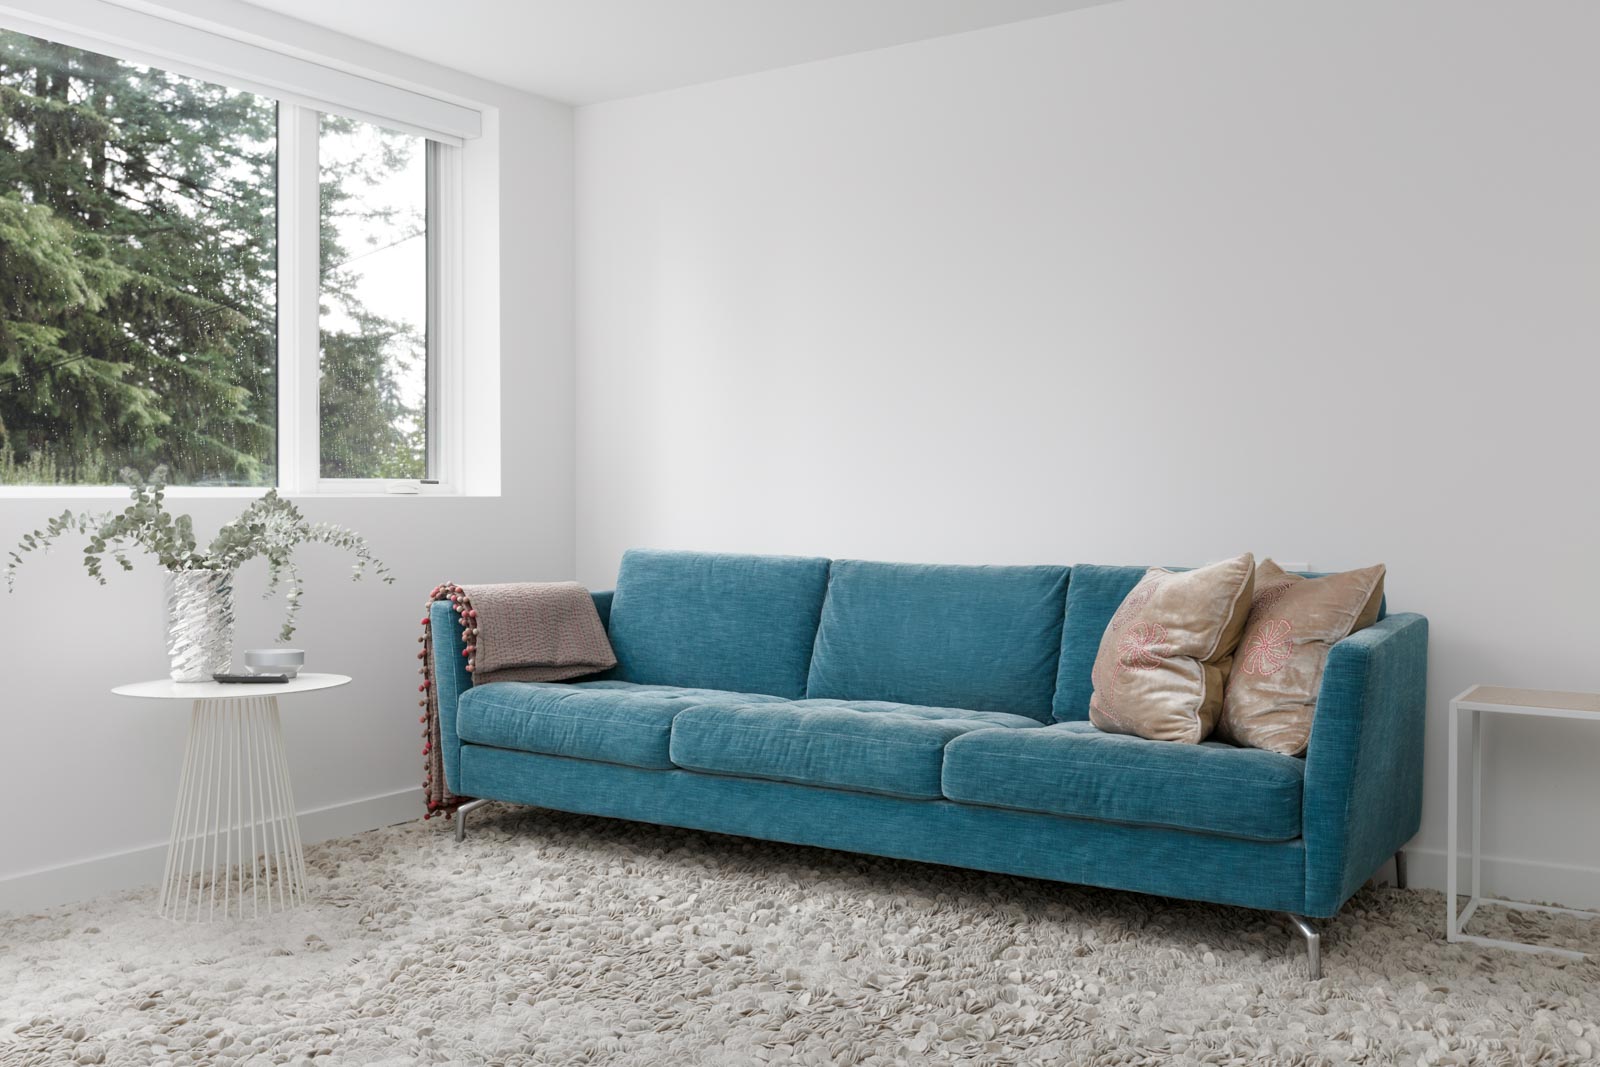 blue couch and grey rug in living room of basement rental suite in modern designed house with white walls and window on left and exposed concrete floors